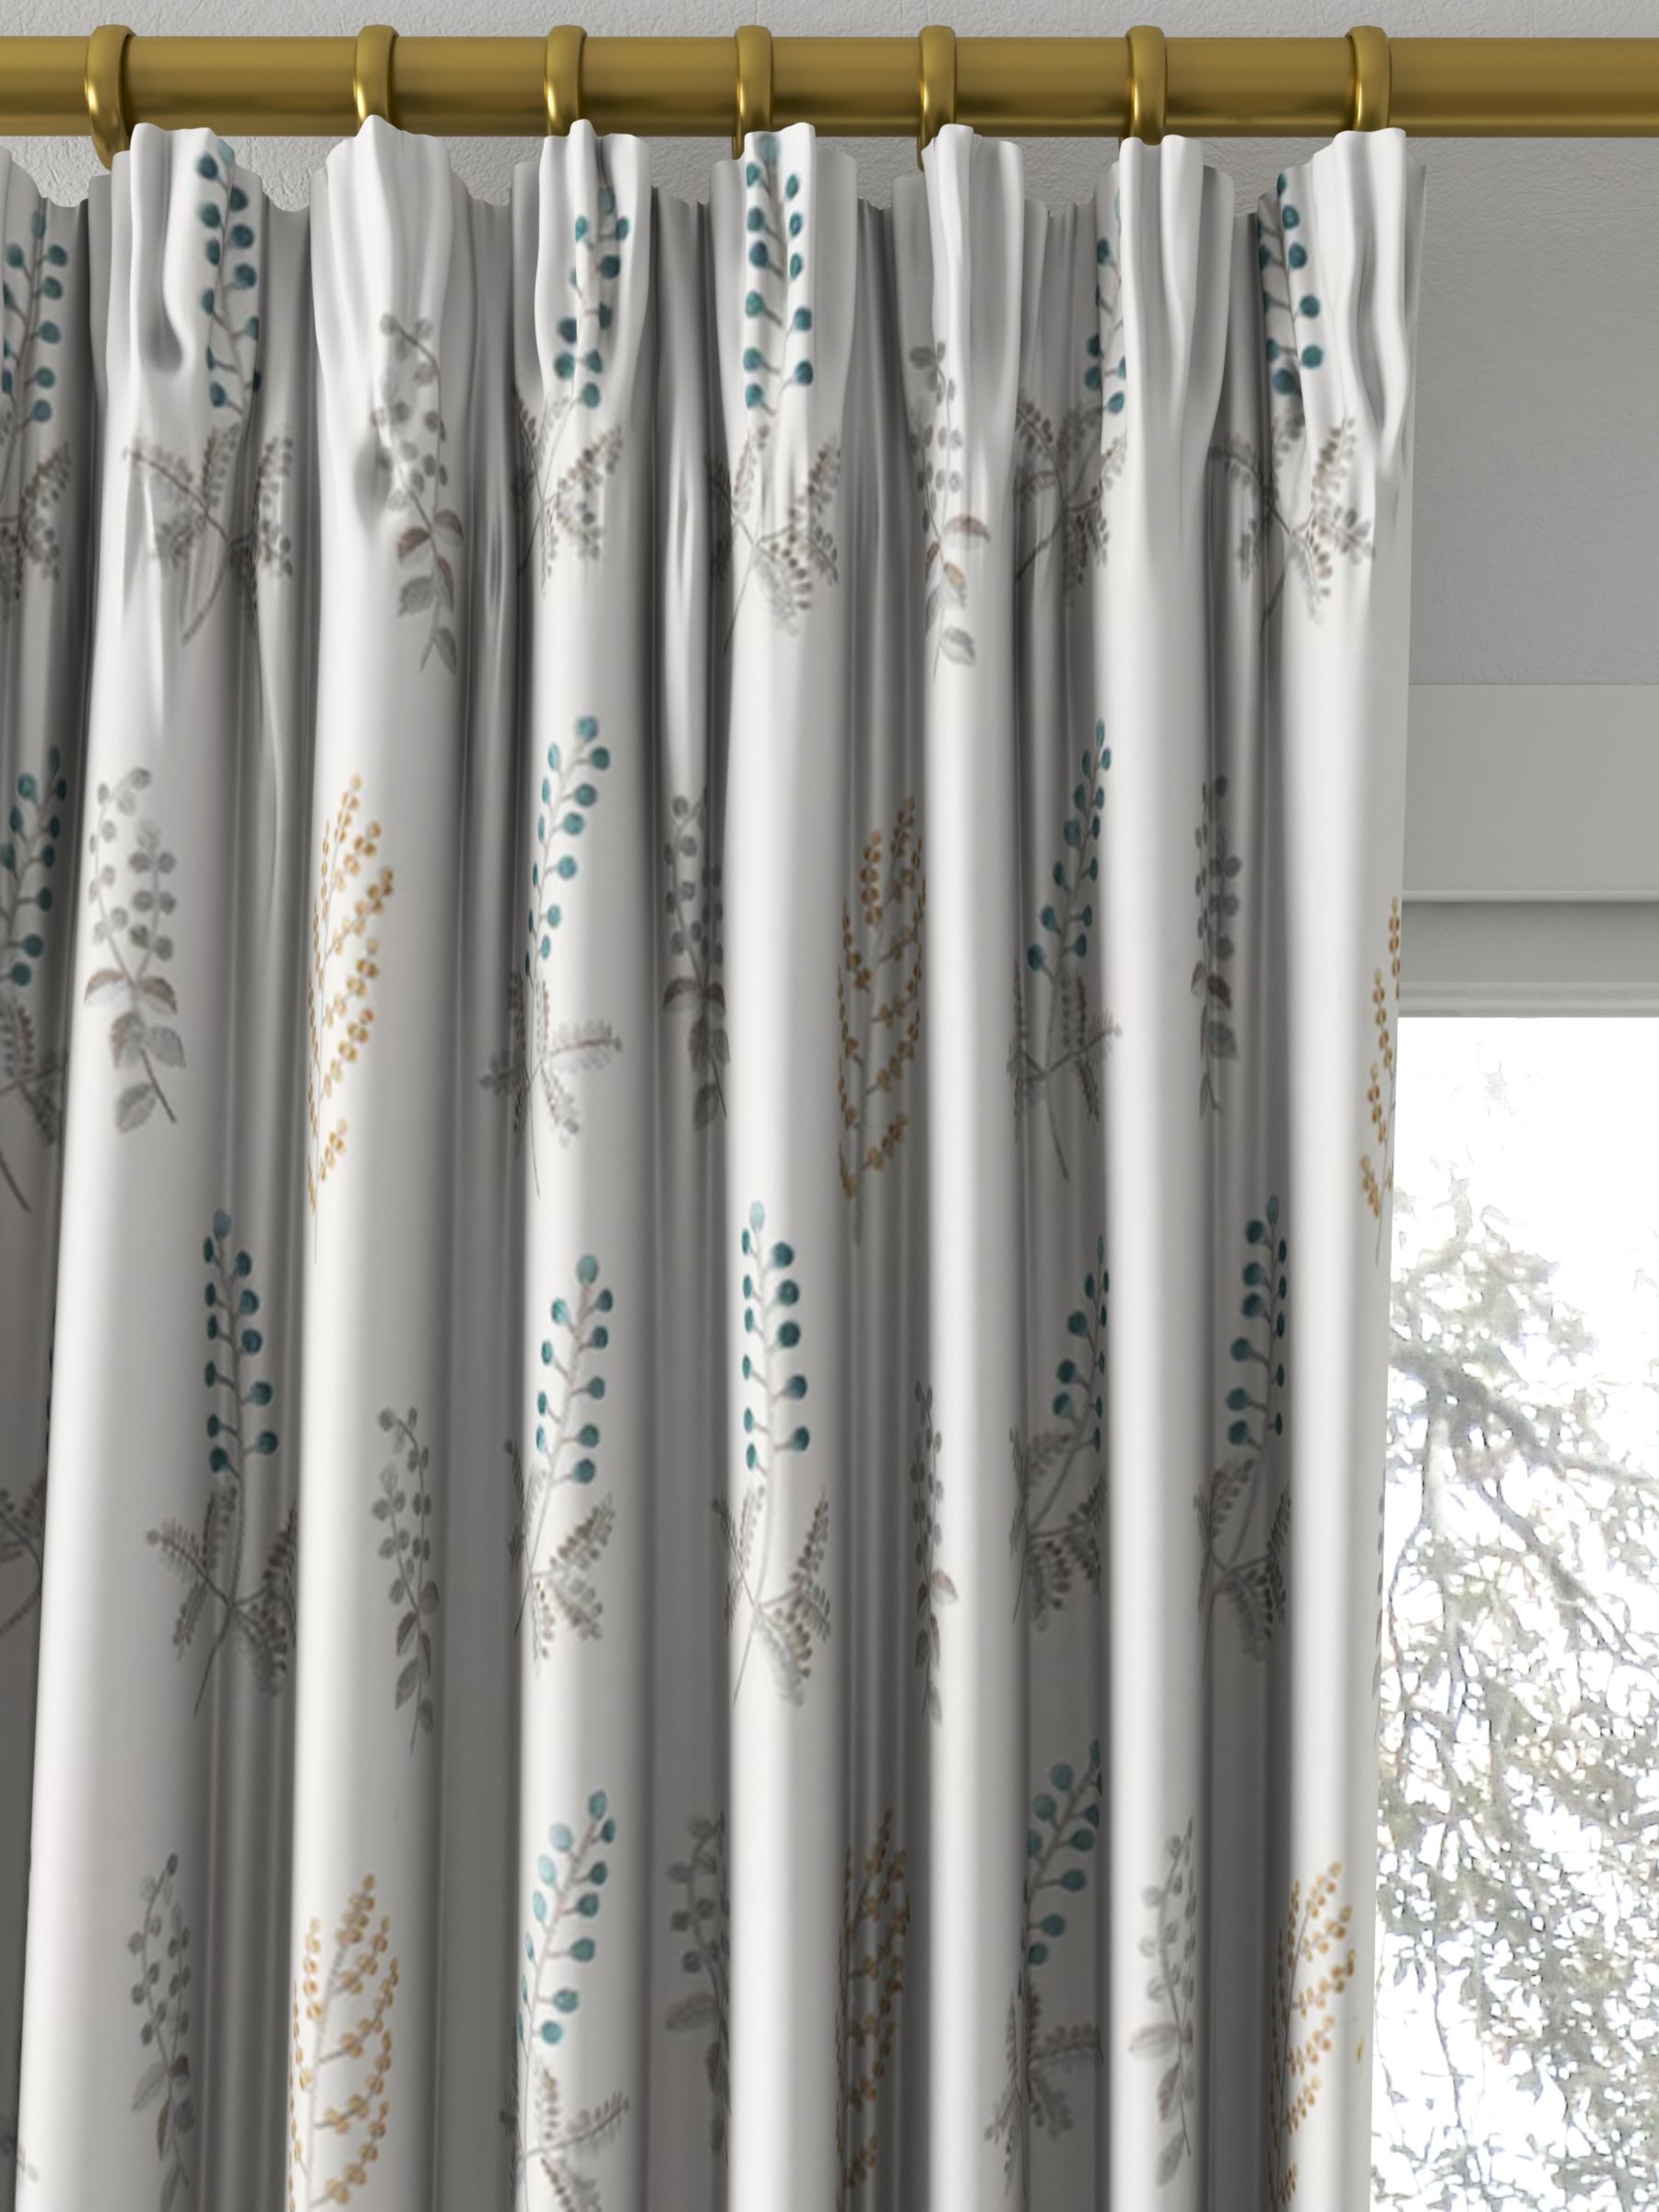 Sanderson Bilberry Made to Measure Curtains, Dijon/Teal